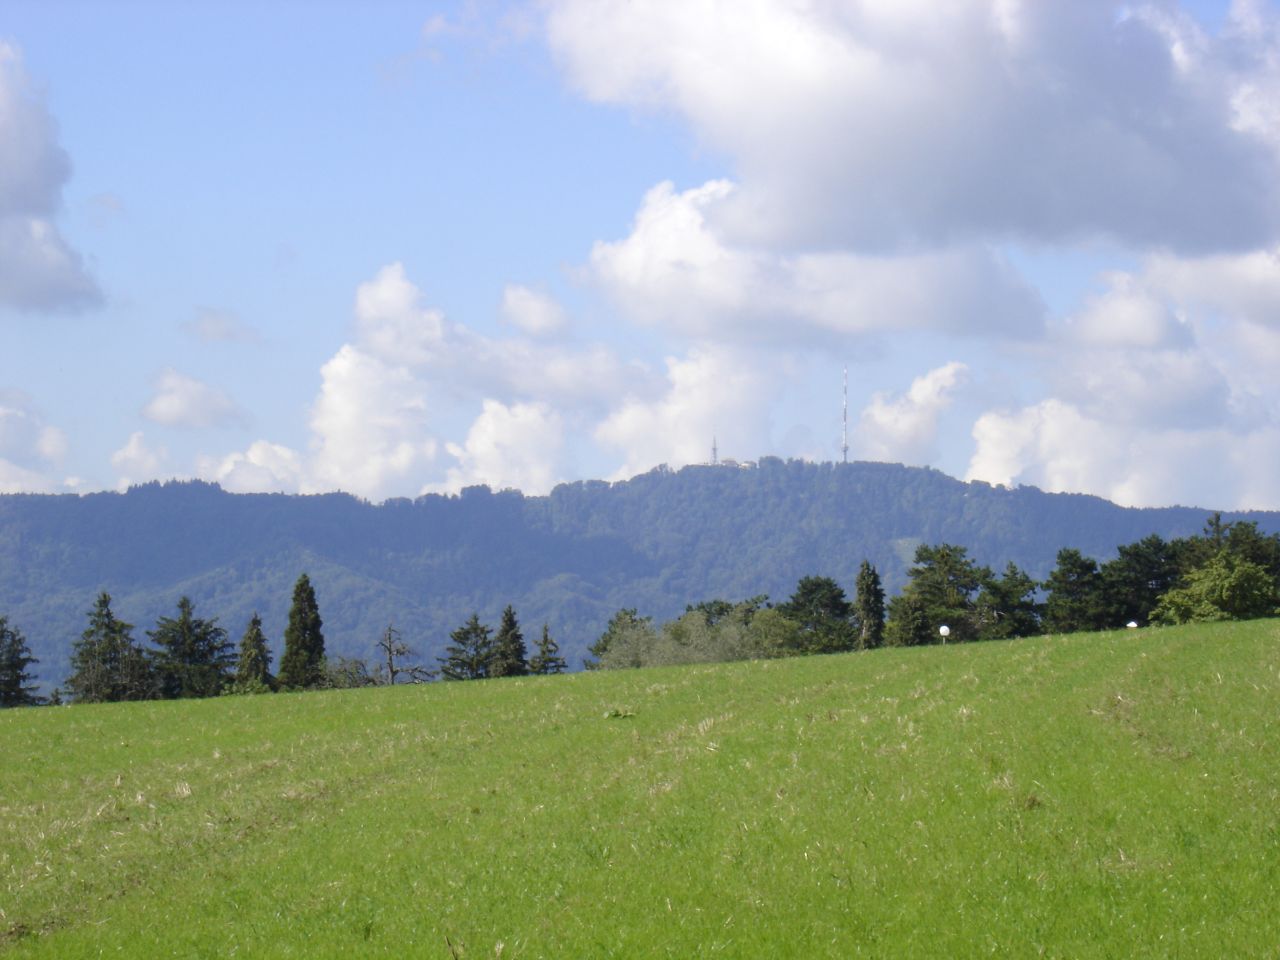 large grassy field in front of trees on hillside